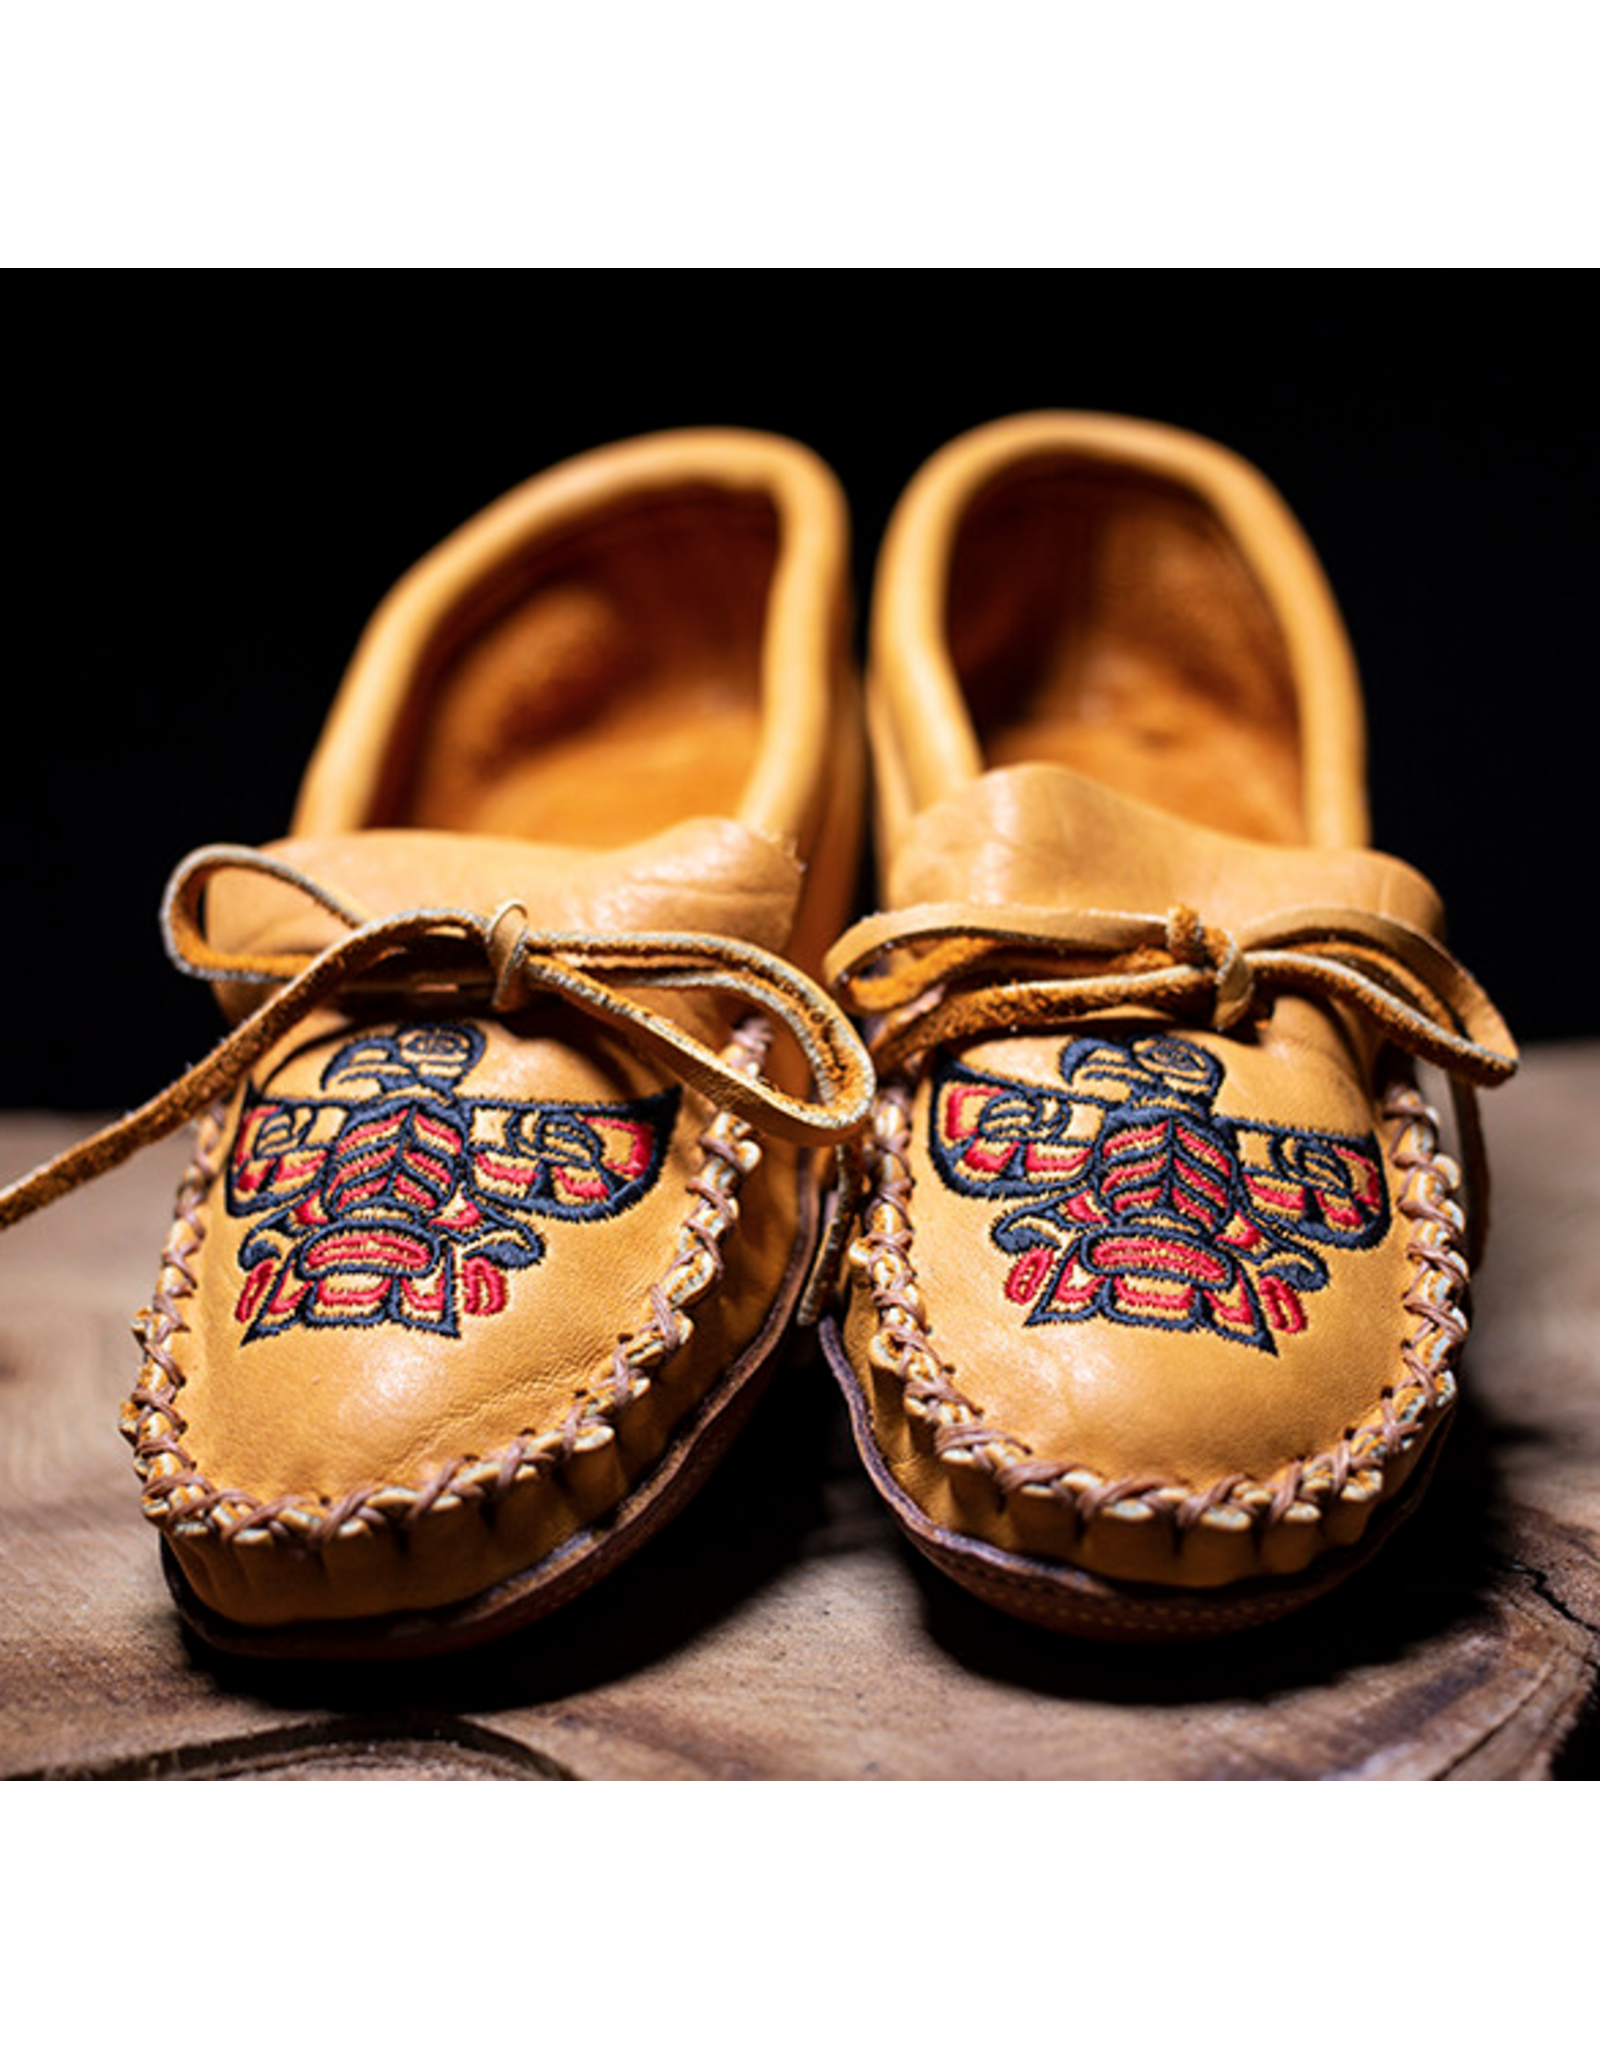 Moose Hide Moccasin Gold & Brown with Eagle Embroidery - Men